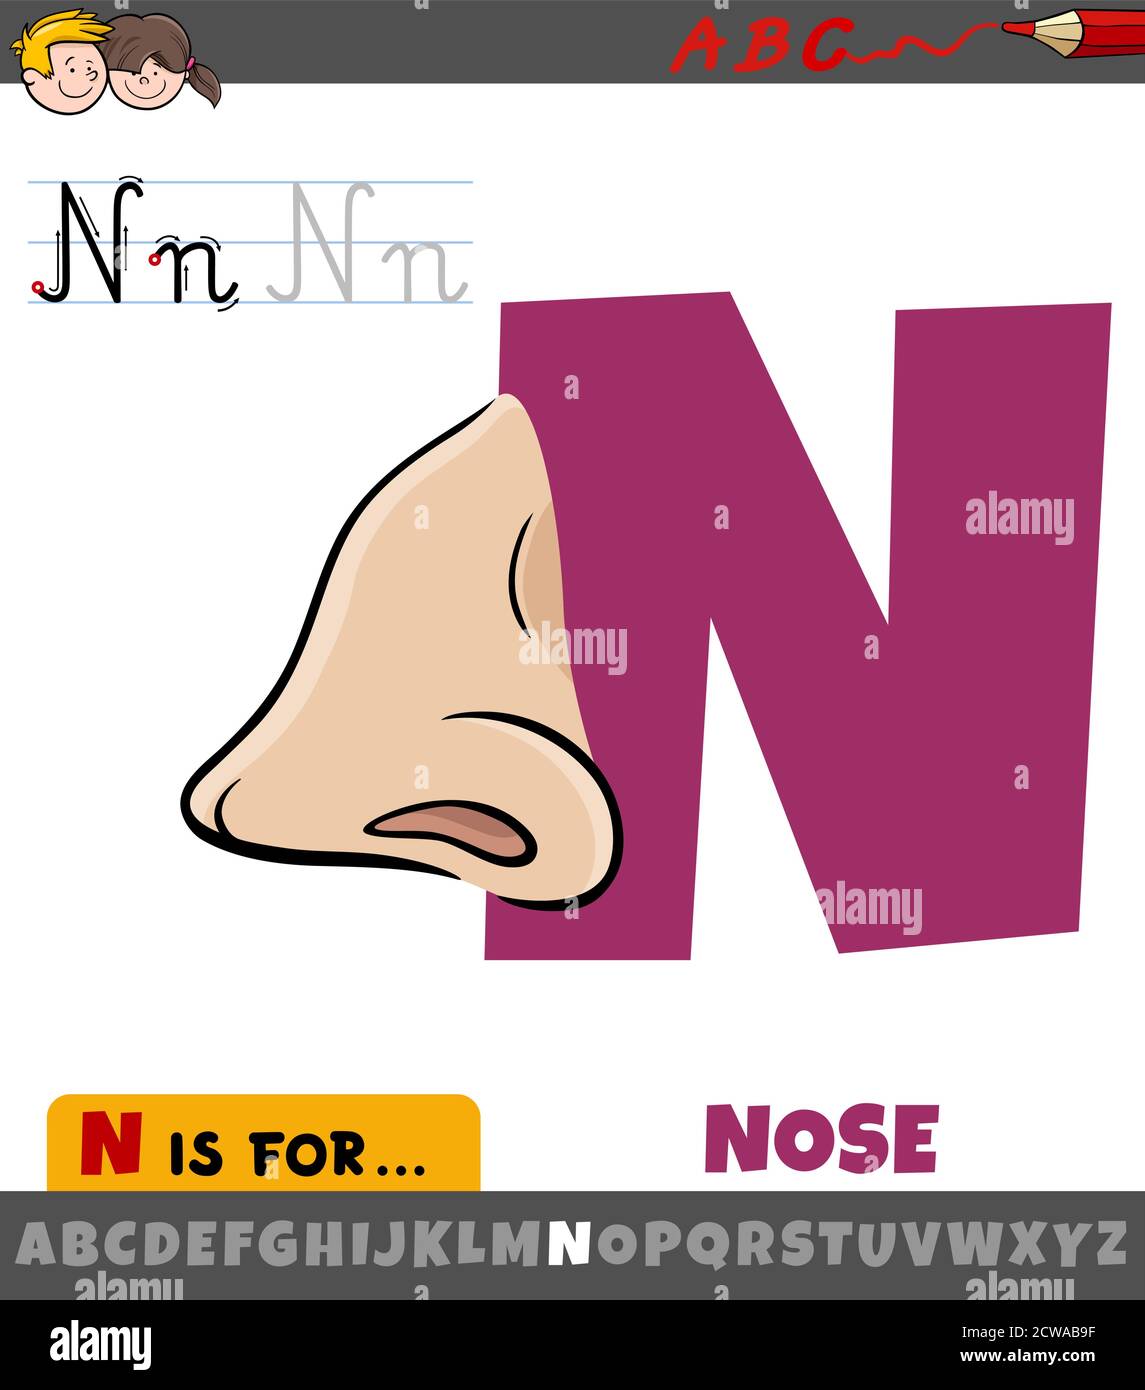 Educational Cartoon Illustration of Letter N from Alphabet with Nose for Children Stock Vector